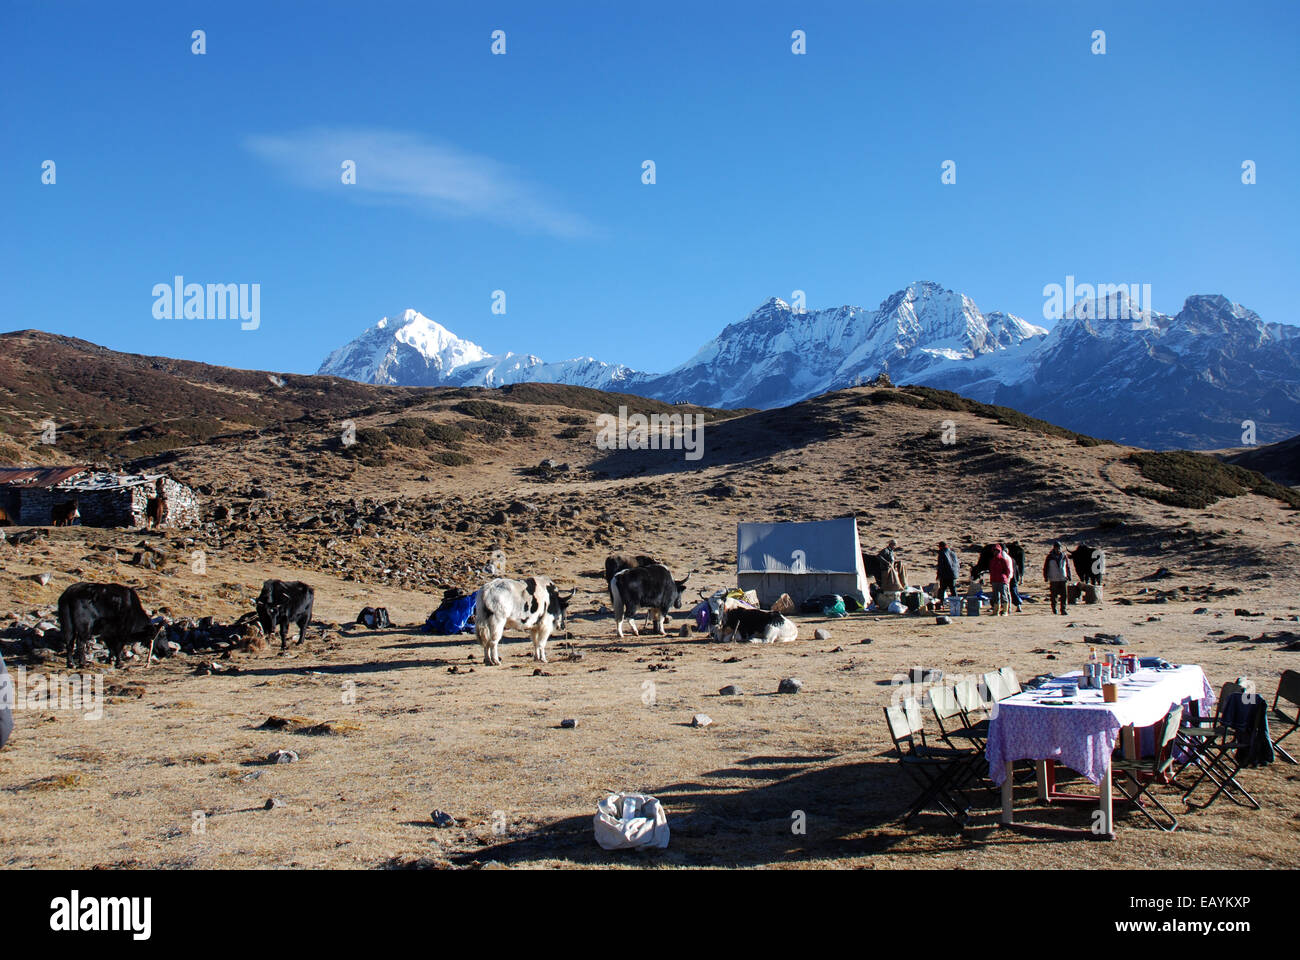 A campsite on the Singalila ridge in the Indian Himalayas with the peaks of the high mountains visible in the background Stock Photo